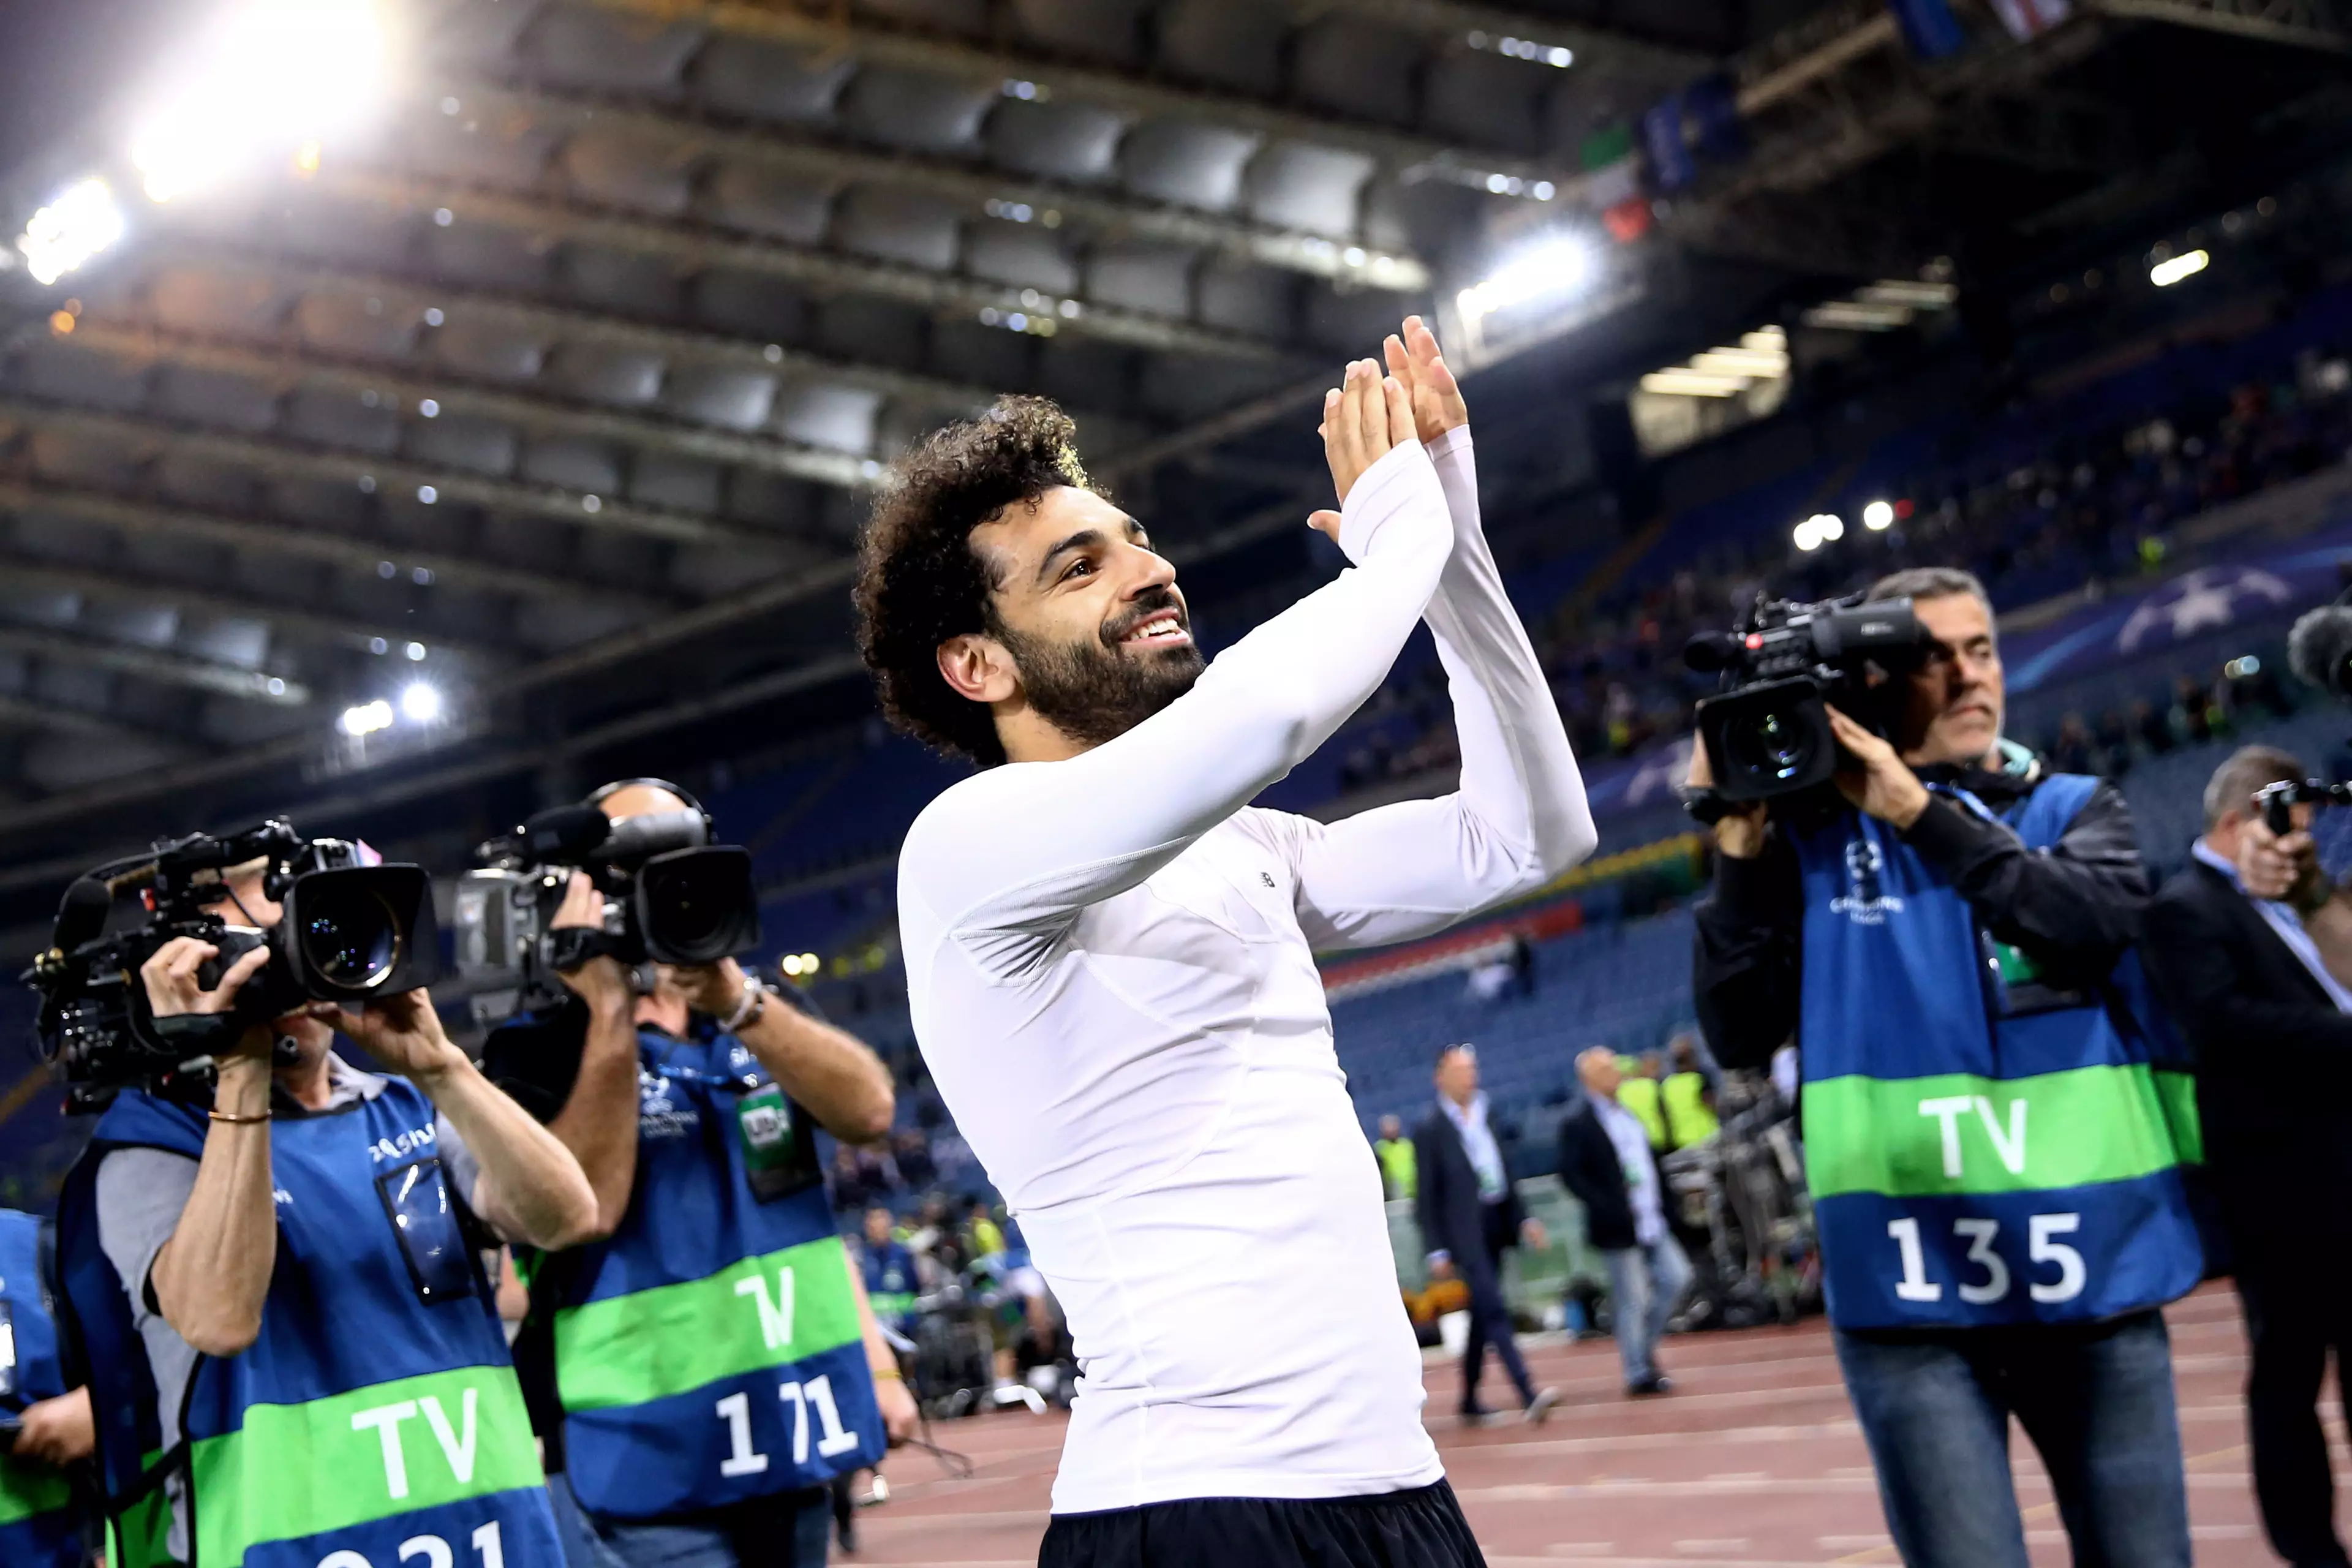 Salah applauds the traveling support in Rome. Image: PA